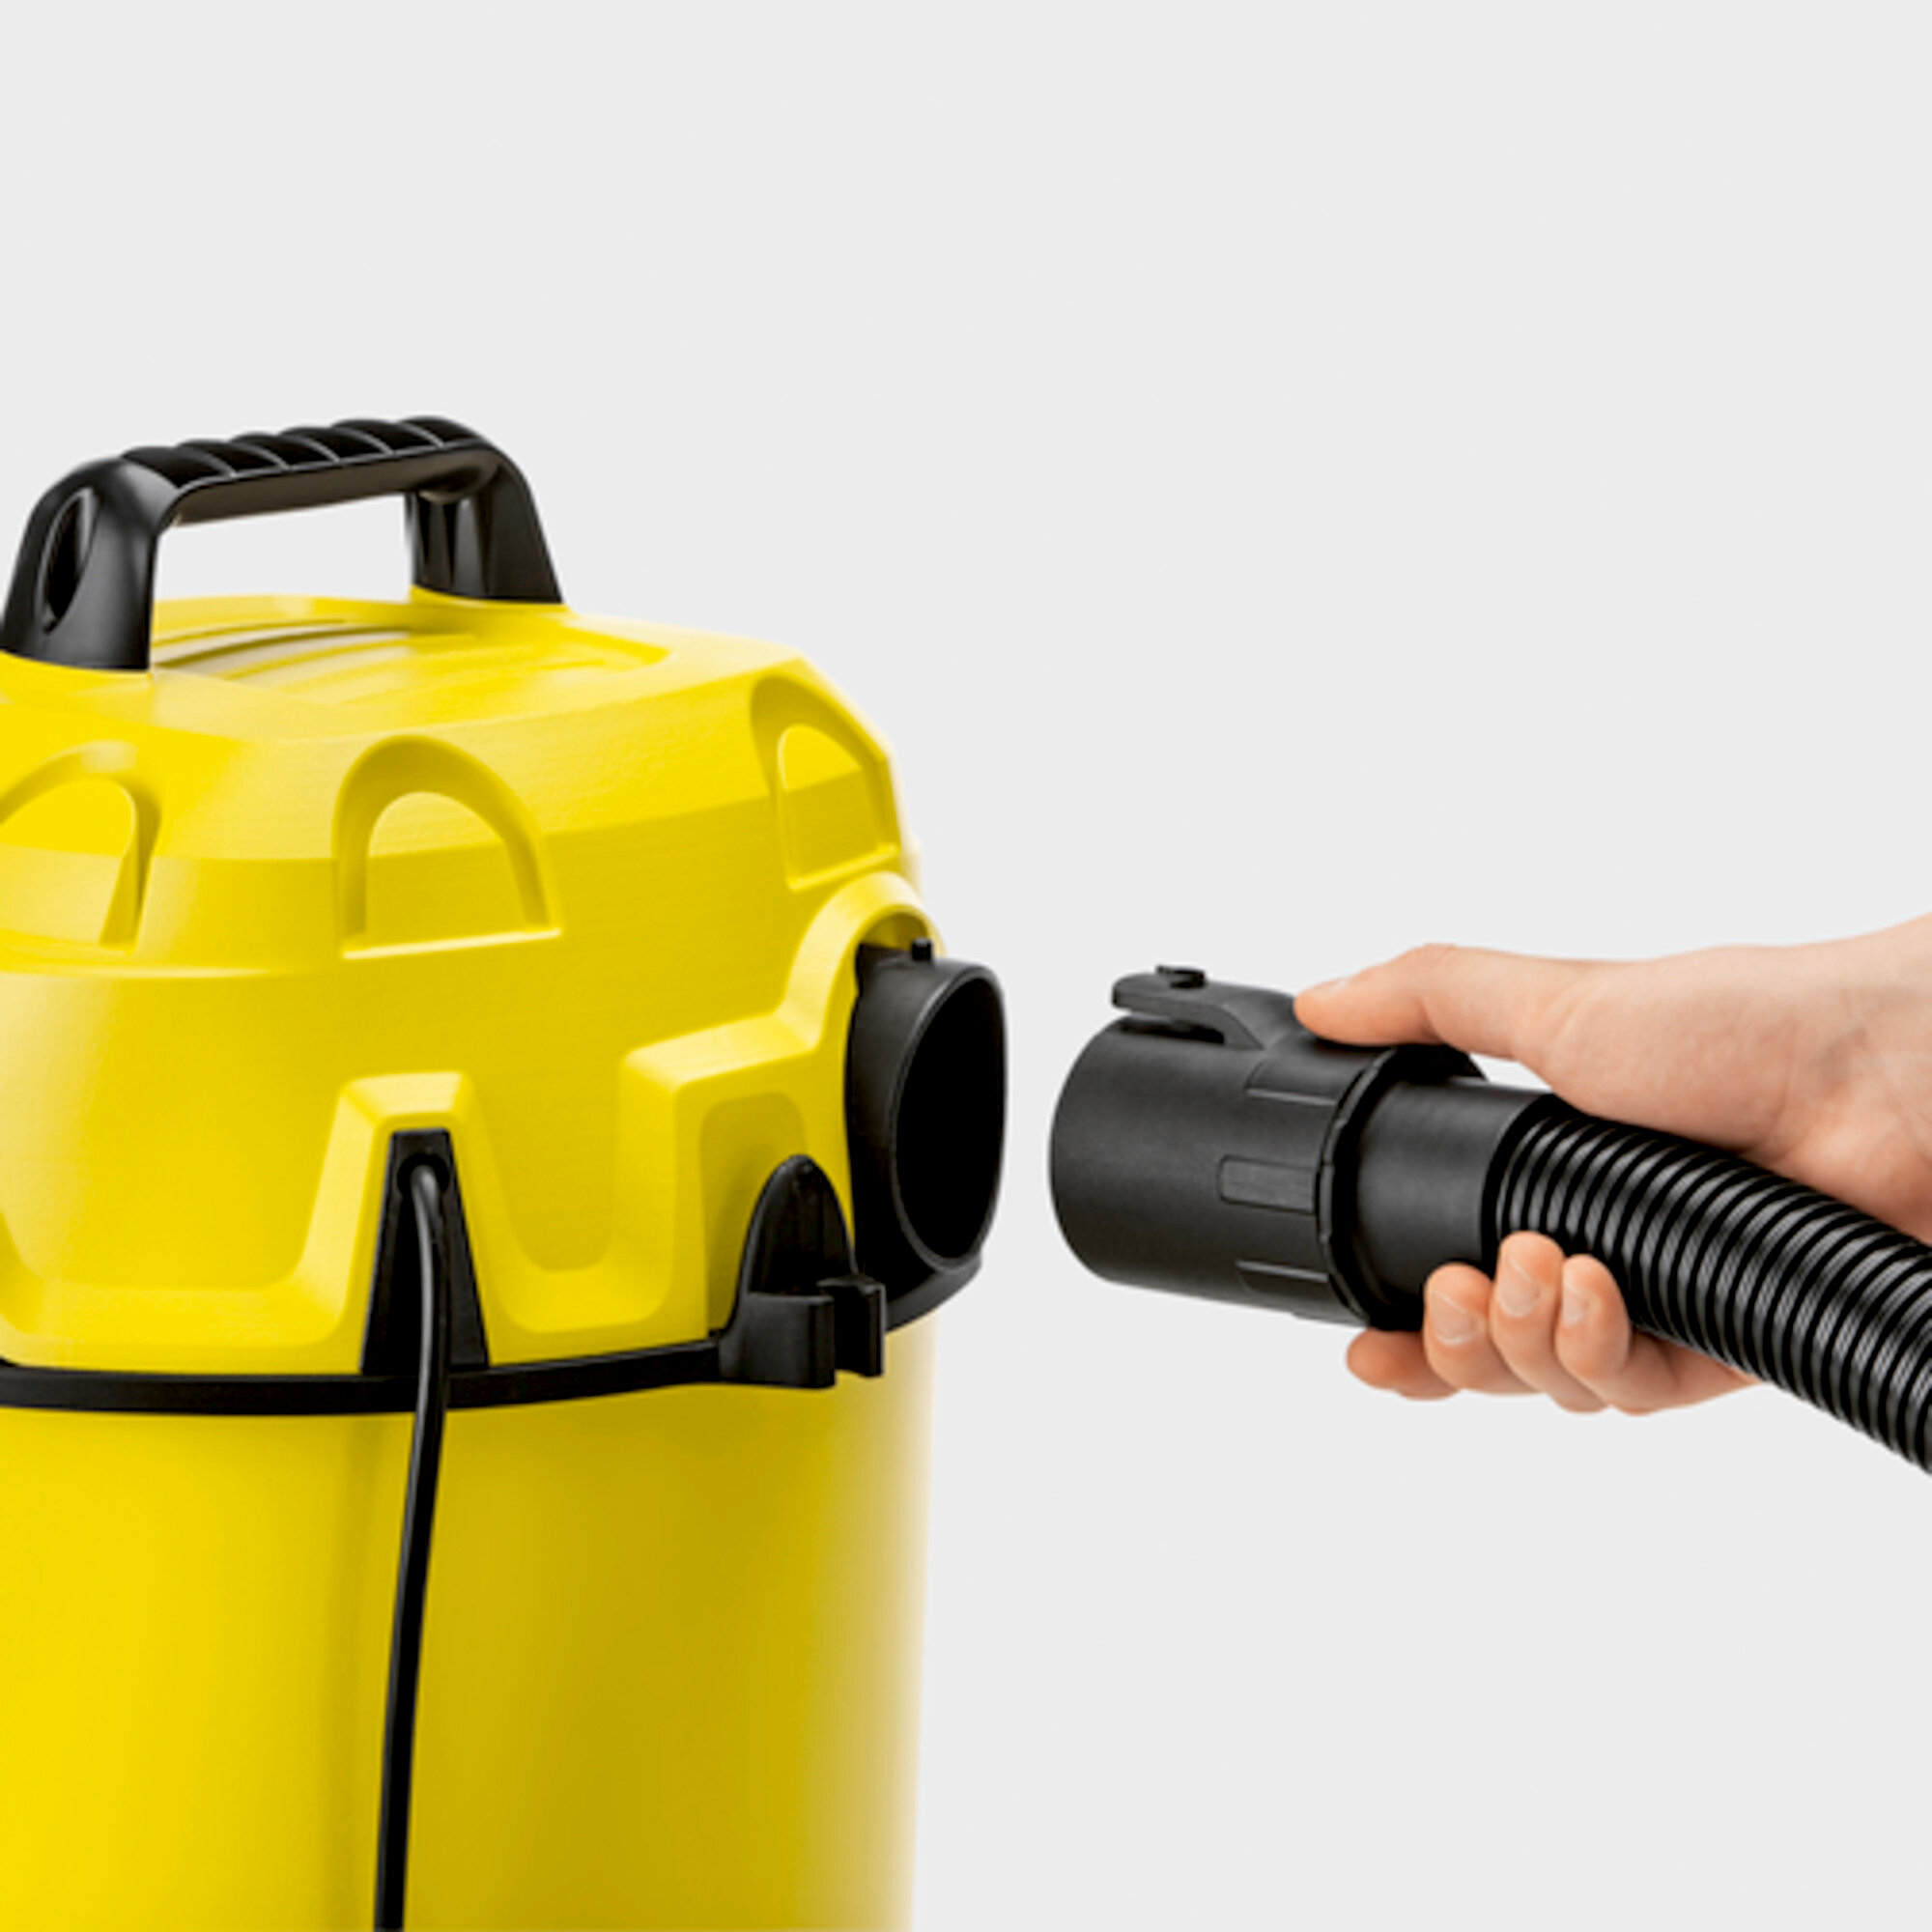 Wet and dry vacuum cleaner WD 1 Home: Practical blower function